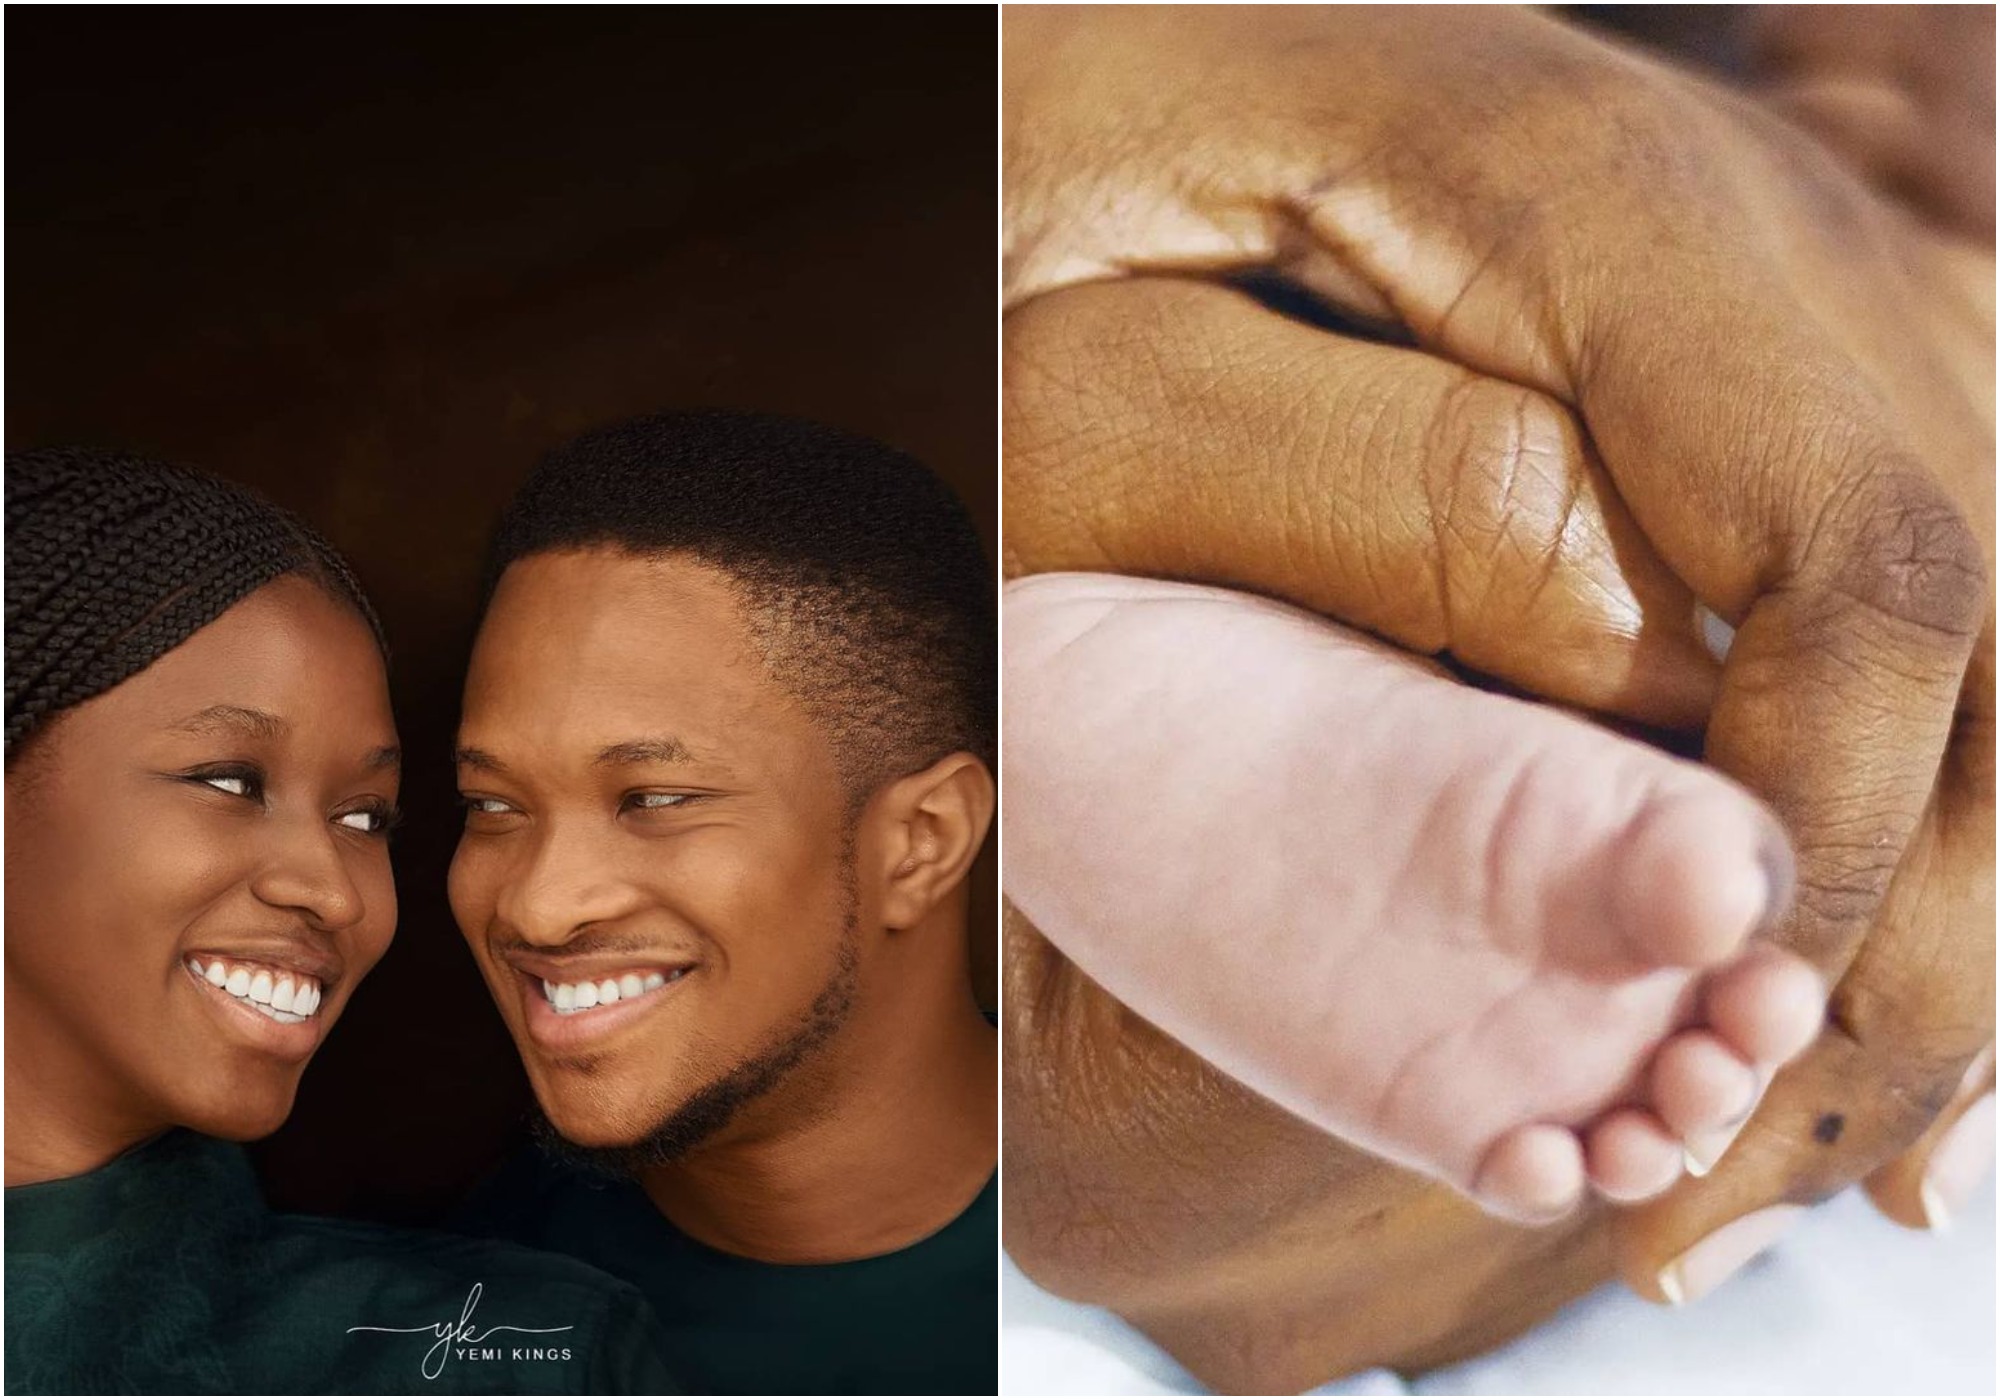 Drama Minister, Mike Bamiloye Welcomes Another Grandchild